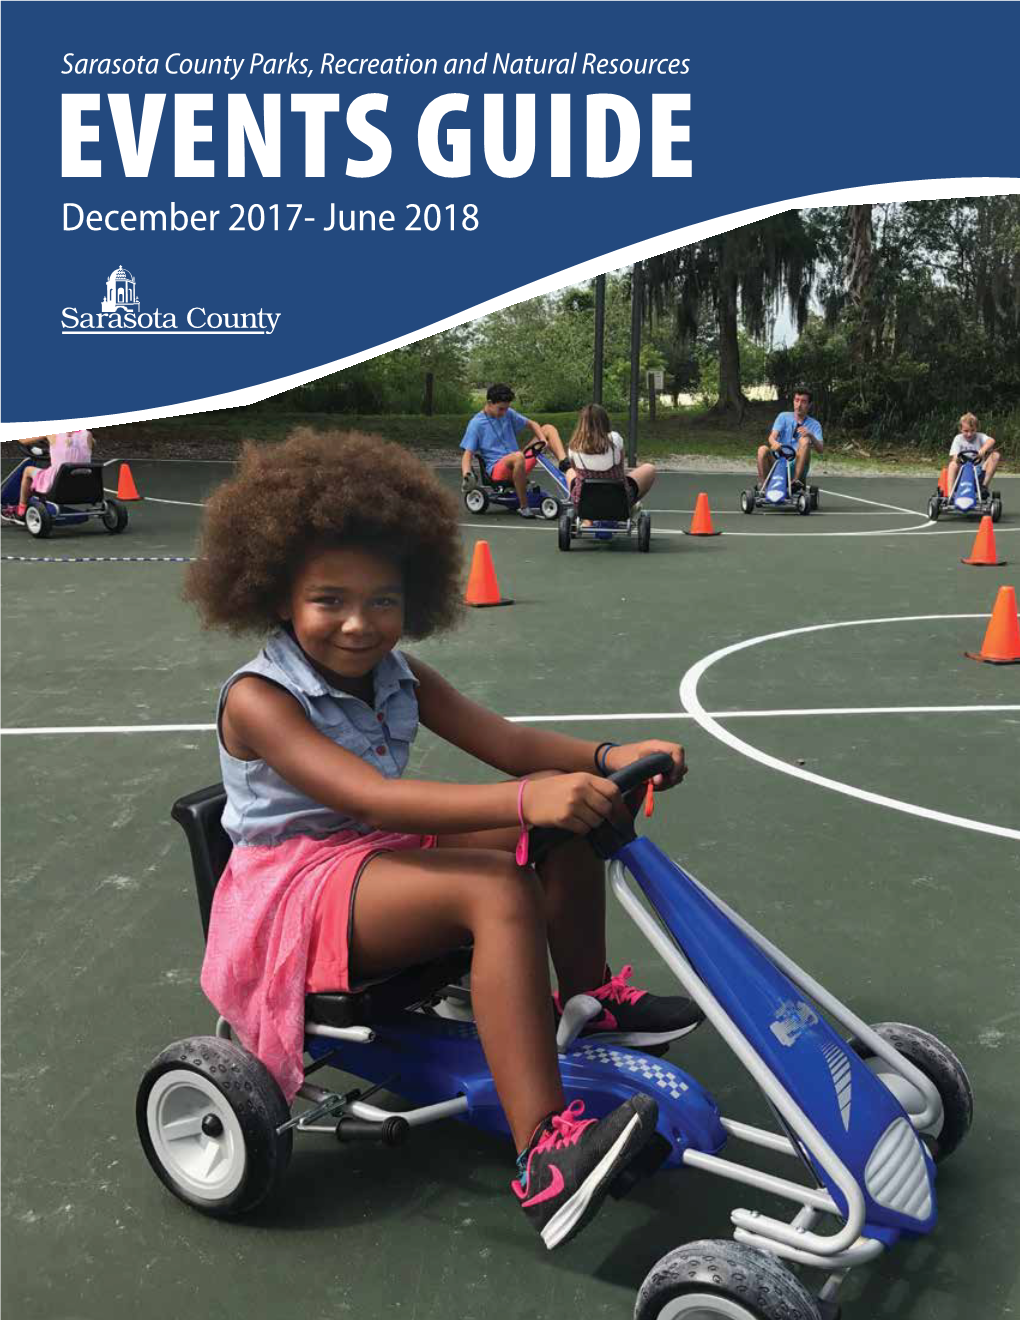 Parks, Recreation and National Resources Events Guide 2017-2018